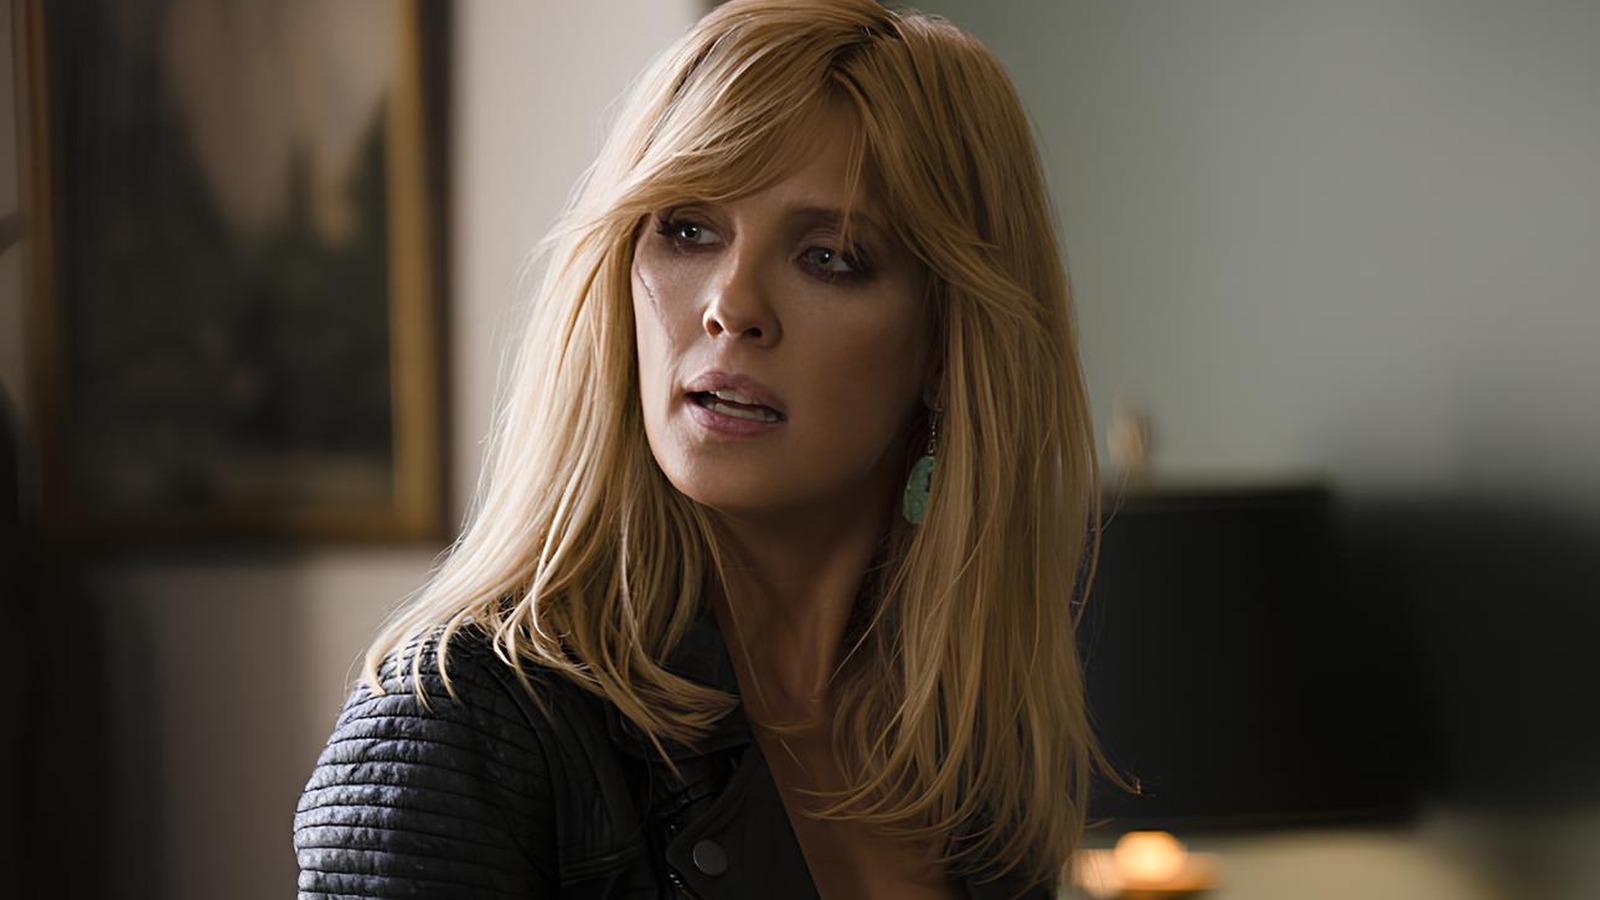 Uncover the Top 5 Kelly Reilly Movies and TV Shows to Binge After Yellowstone for Ultimate Entertainment